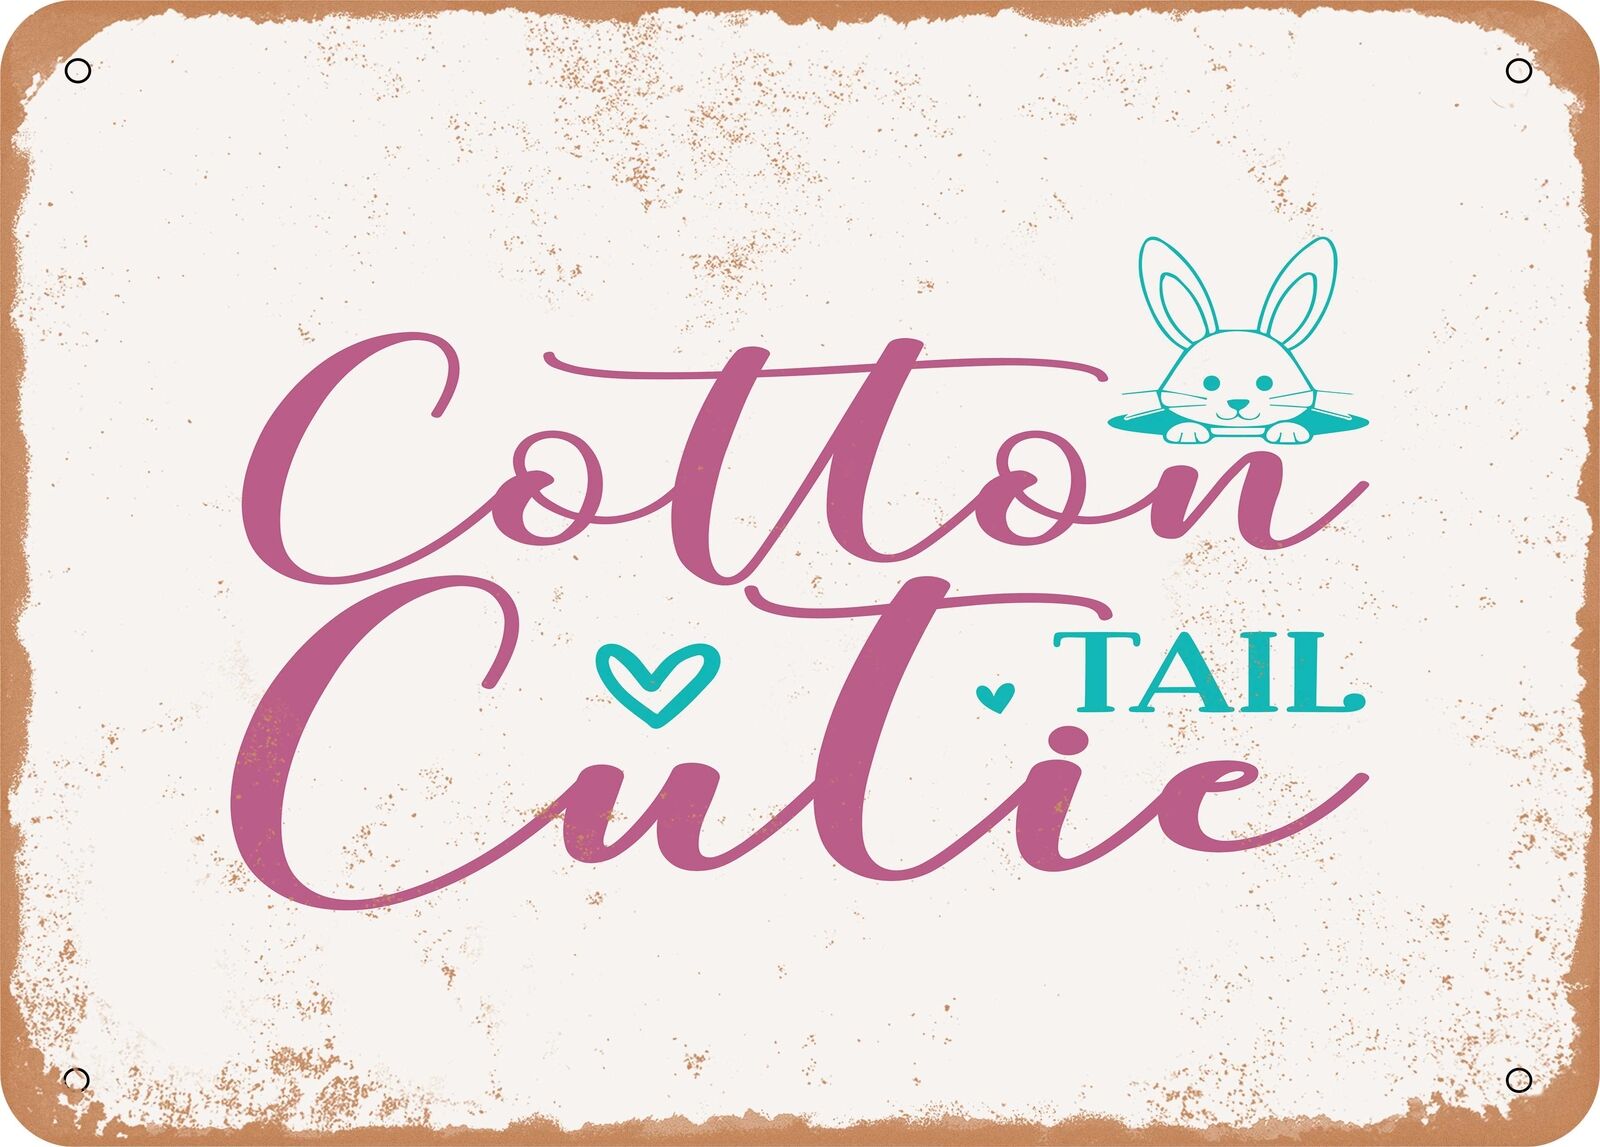 Metal Sign - Cottontail Cutie - Vintage Look Sign